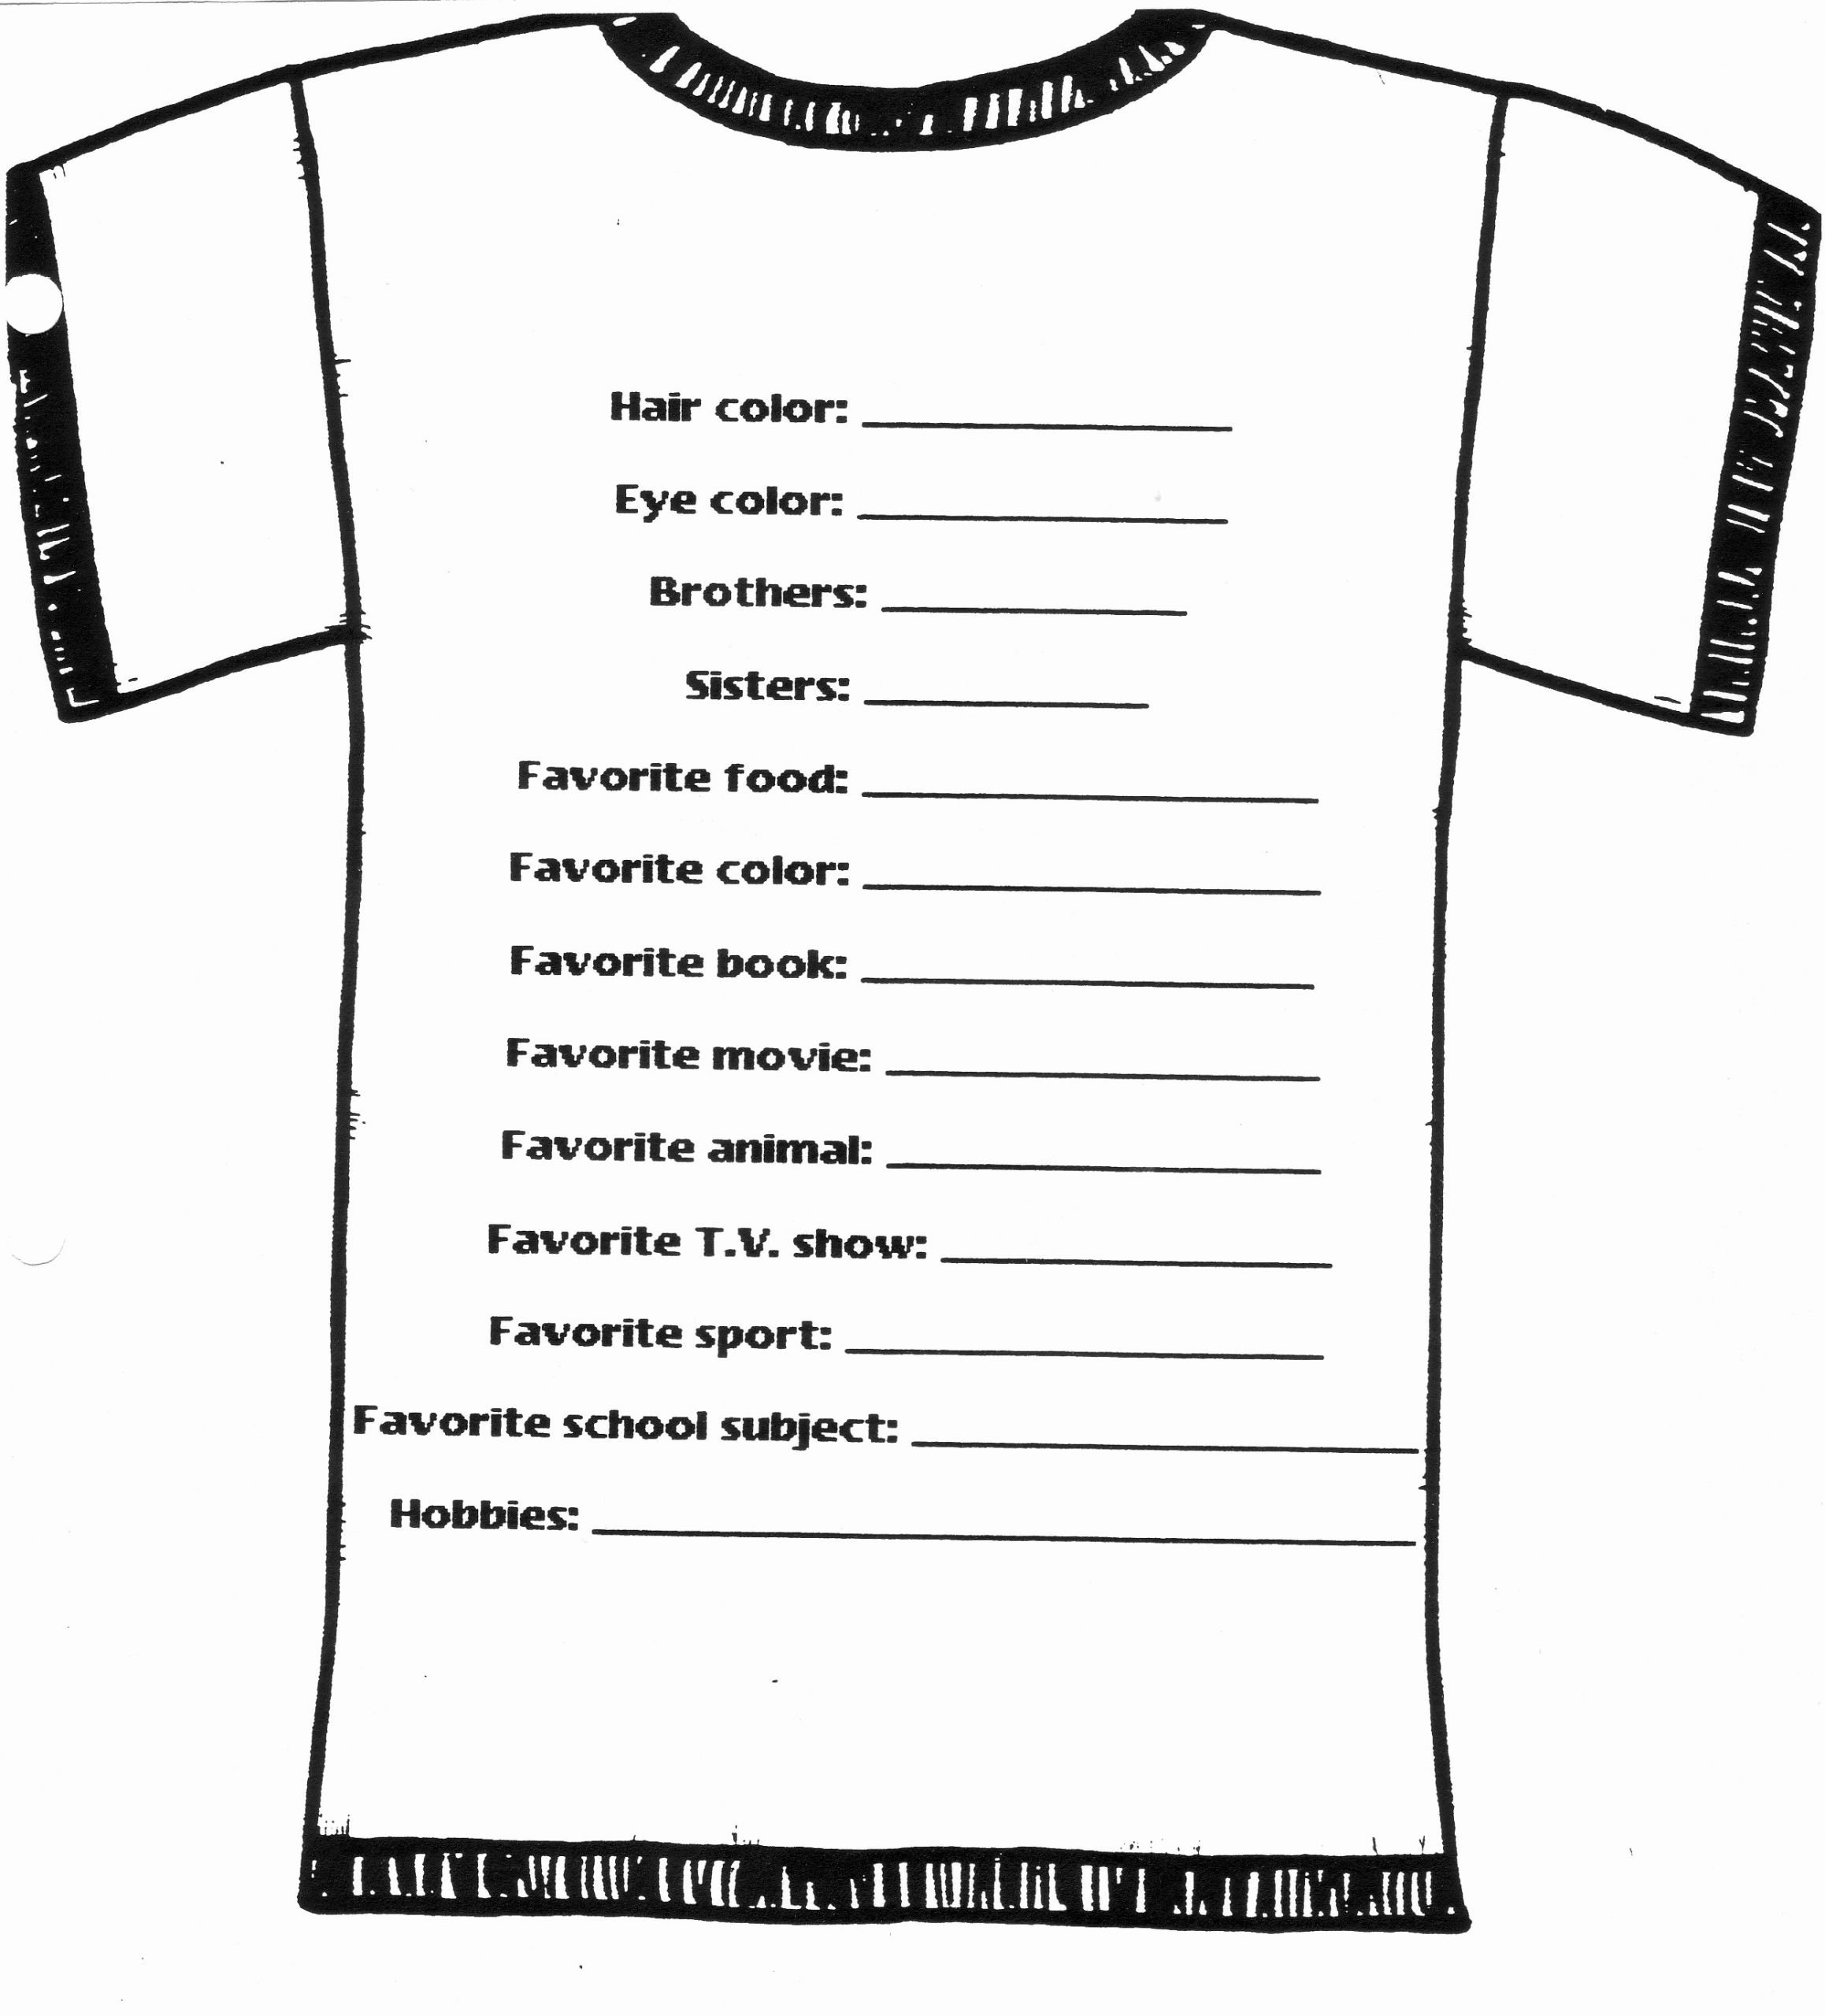 Apparel order form Template Free Best Of Pin by Regina Alcorn On Teaching Ideas